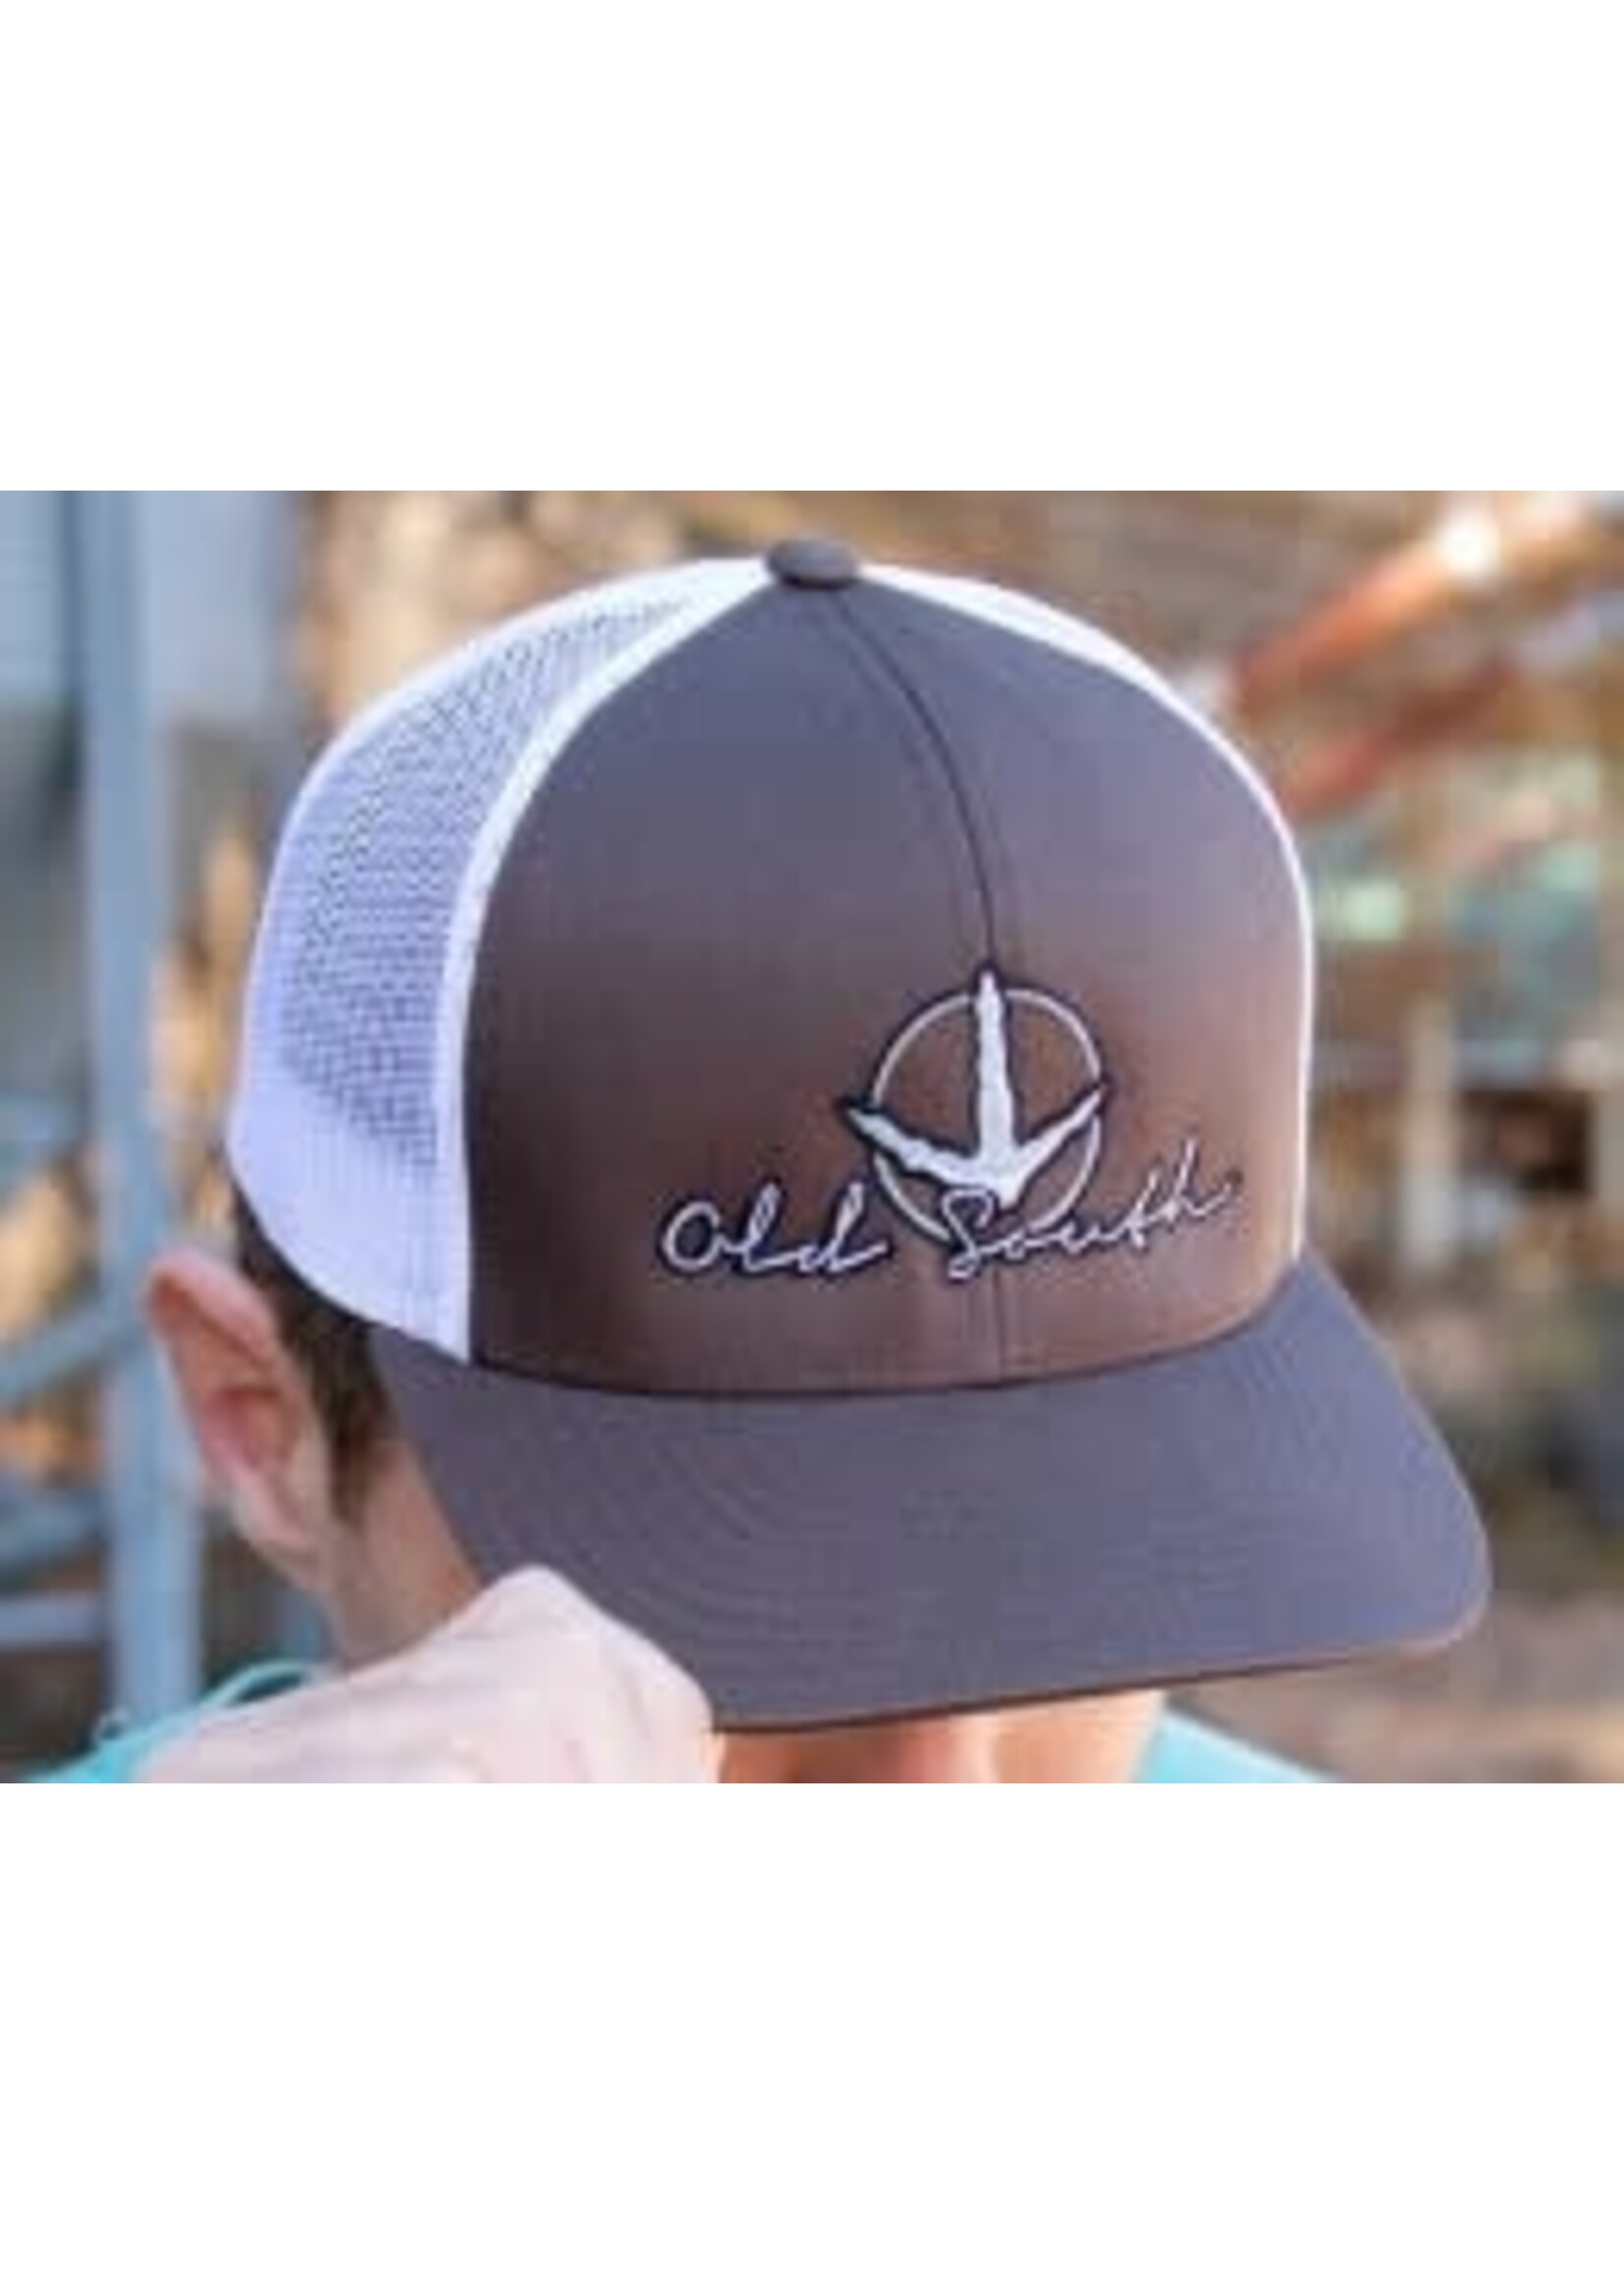 Old South Old South Trucker Hat